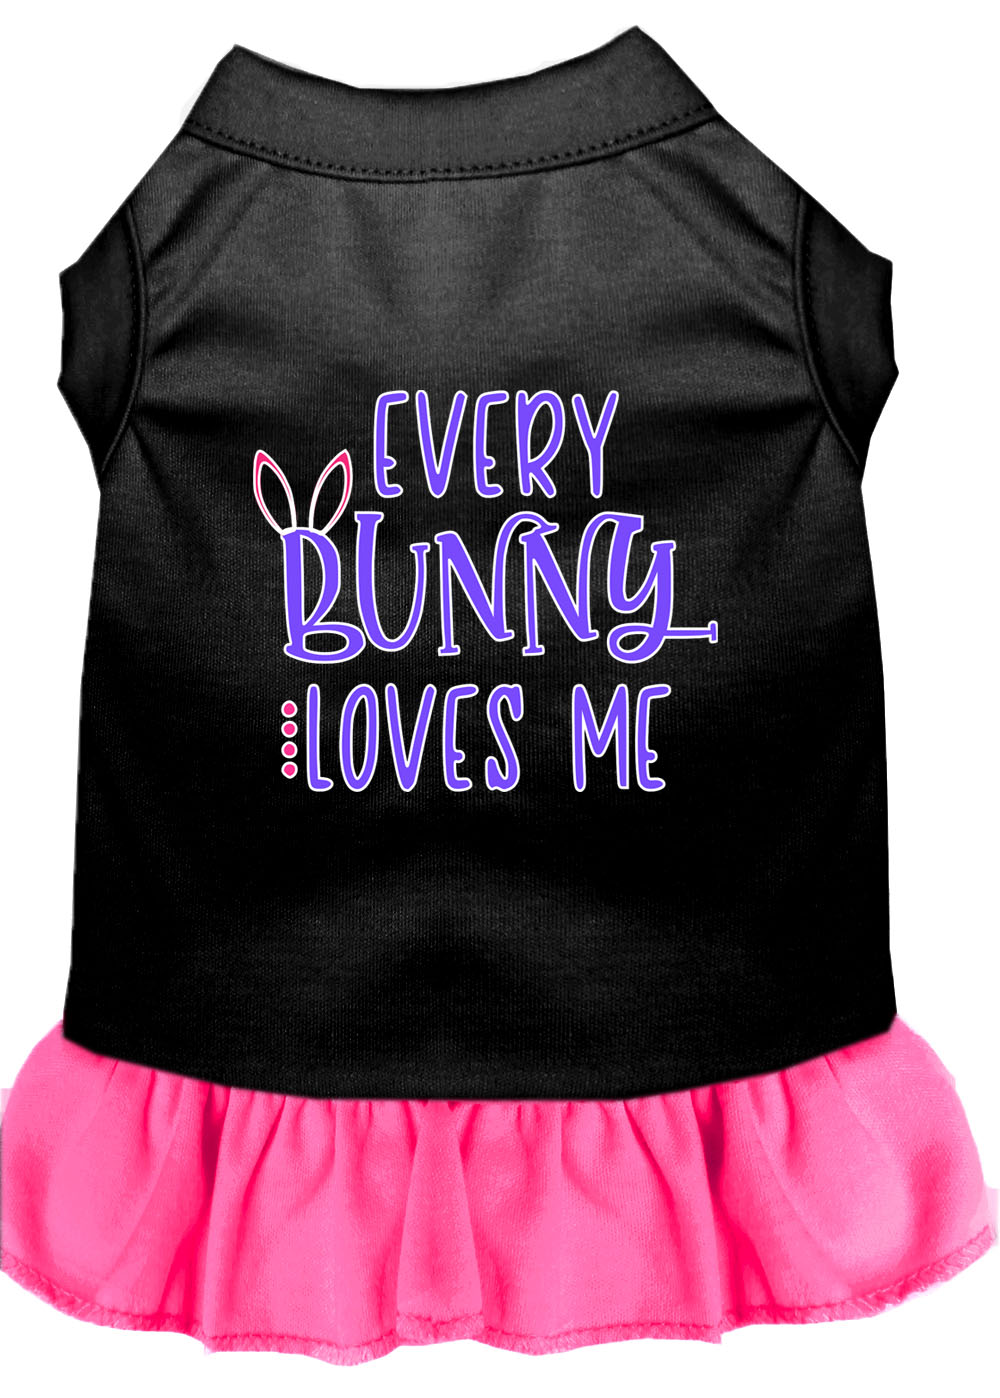 Every Bunny Loves me Screen Print Dog Dress Black with Bright Pink Lg